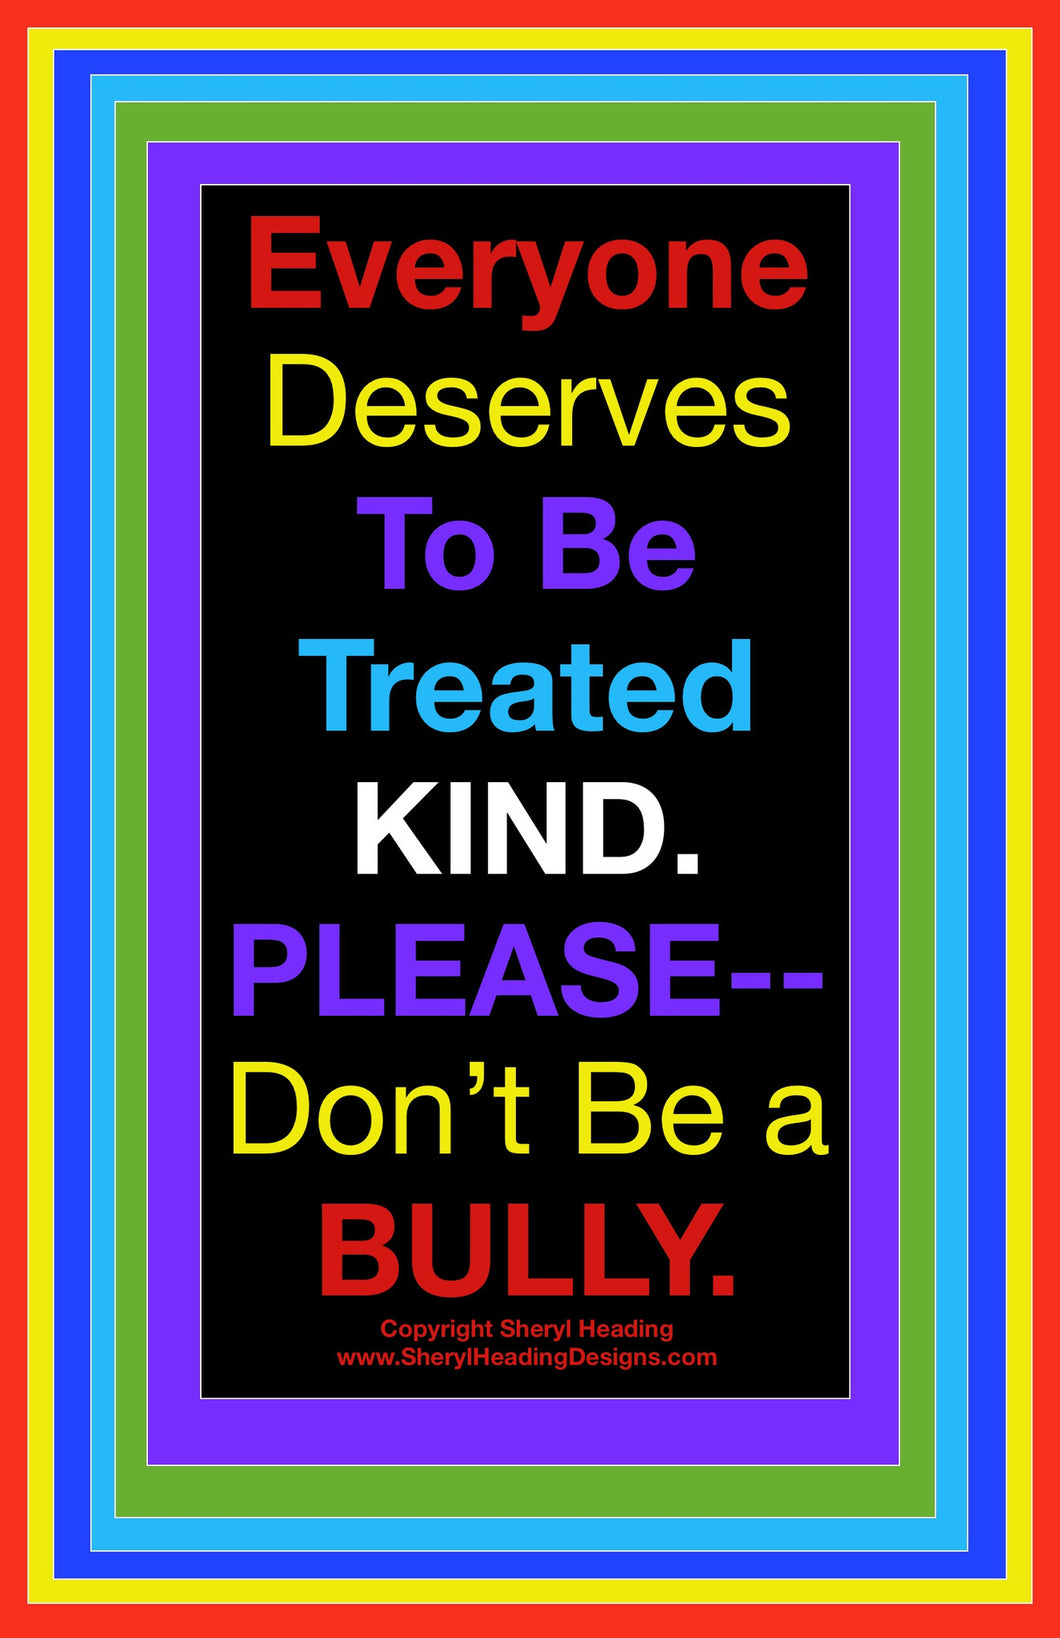 Please Don't Be A Bully Poster - Sheryl Heading Designs